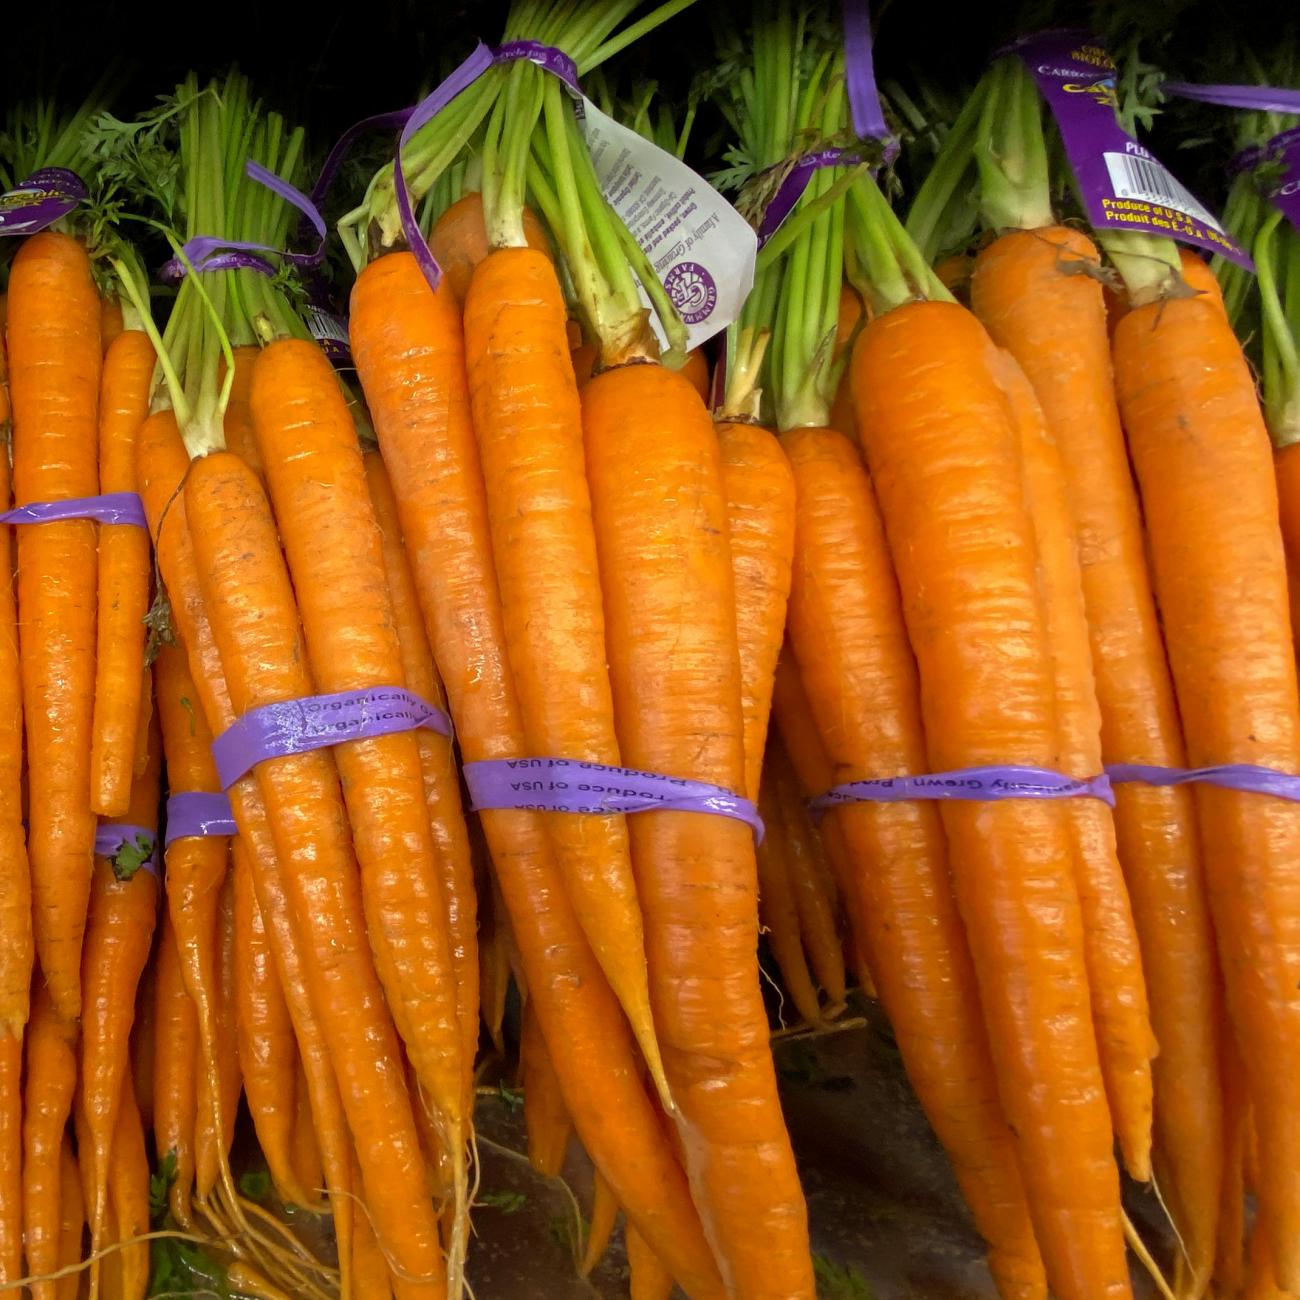 Fresh orange carrots lie in bunches side by side for sale at a grocery store in Del Mar, California, on June 3, 2020.